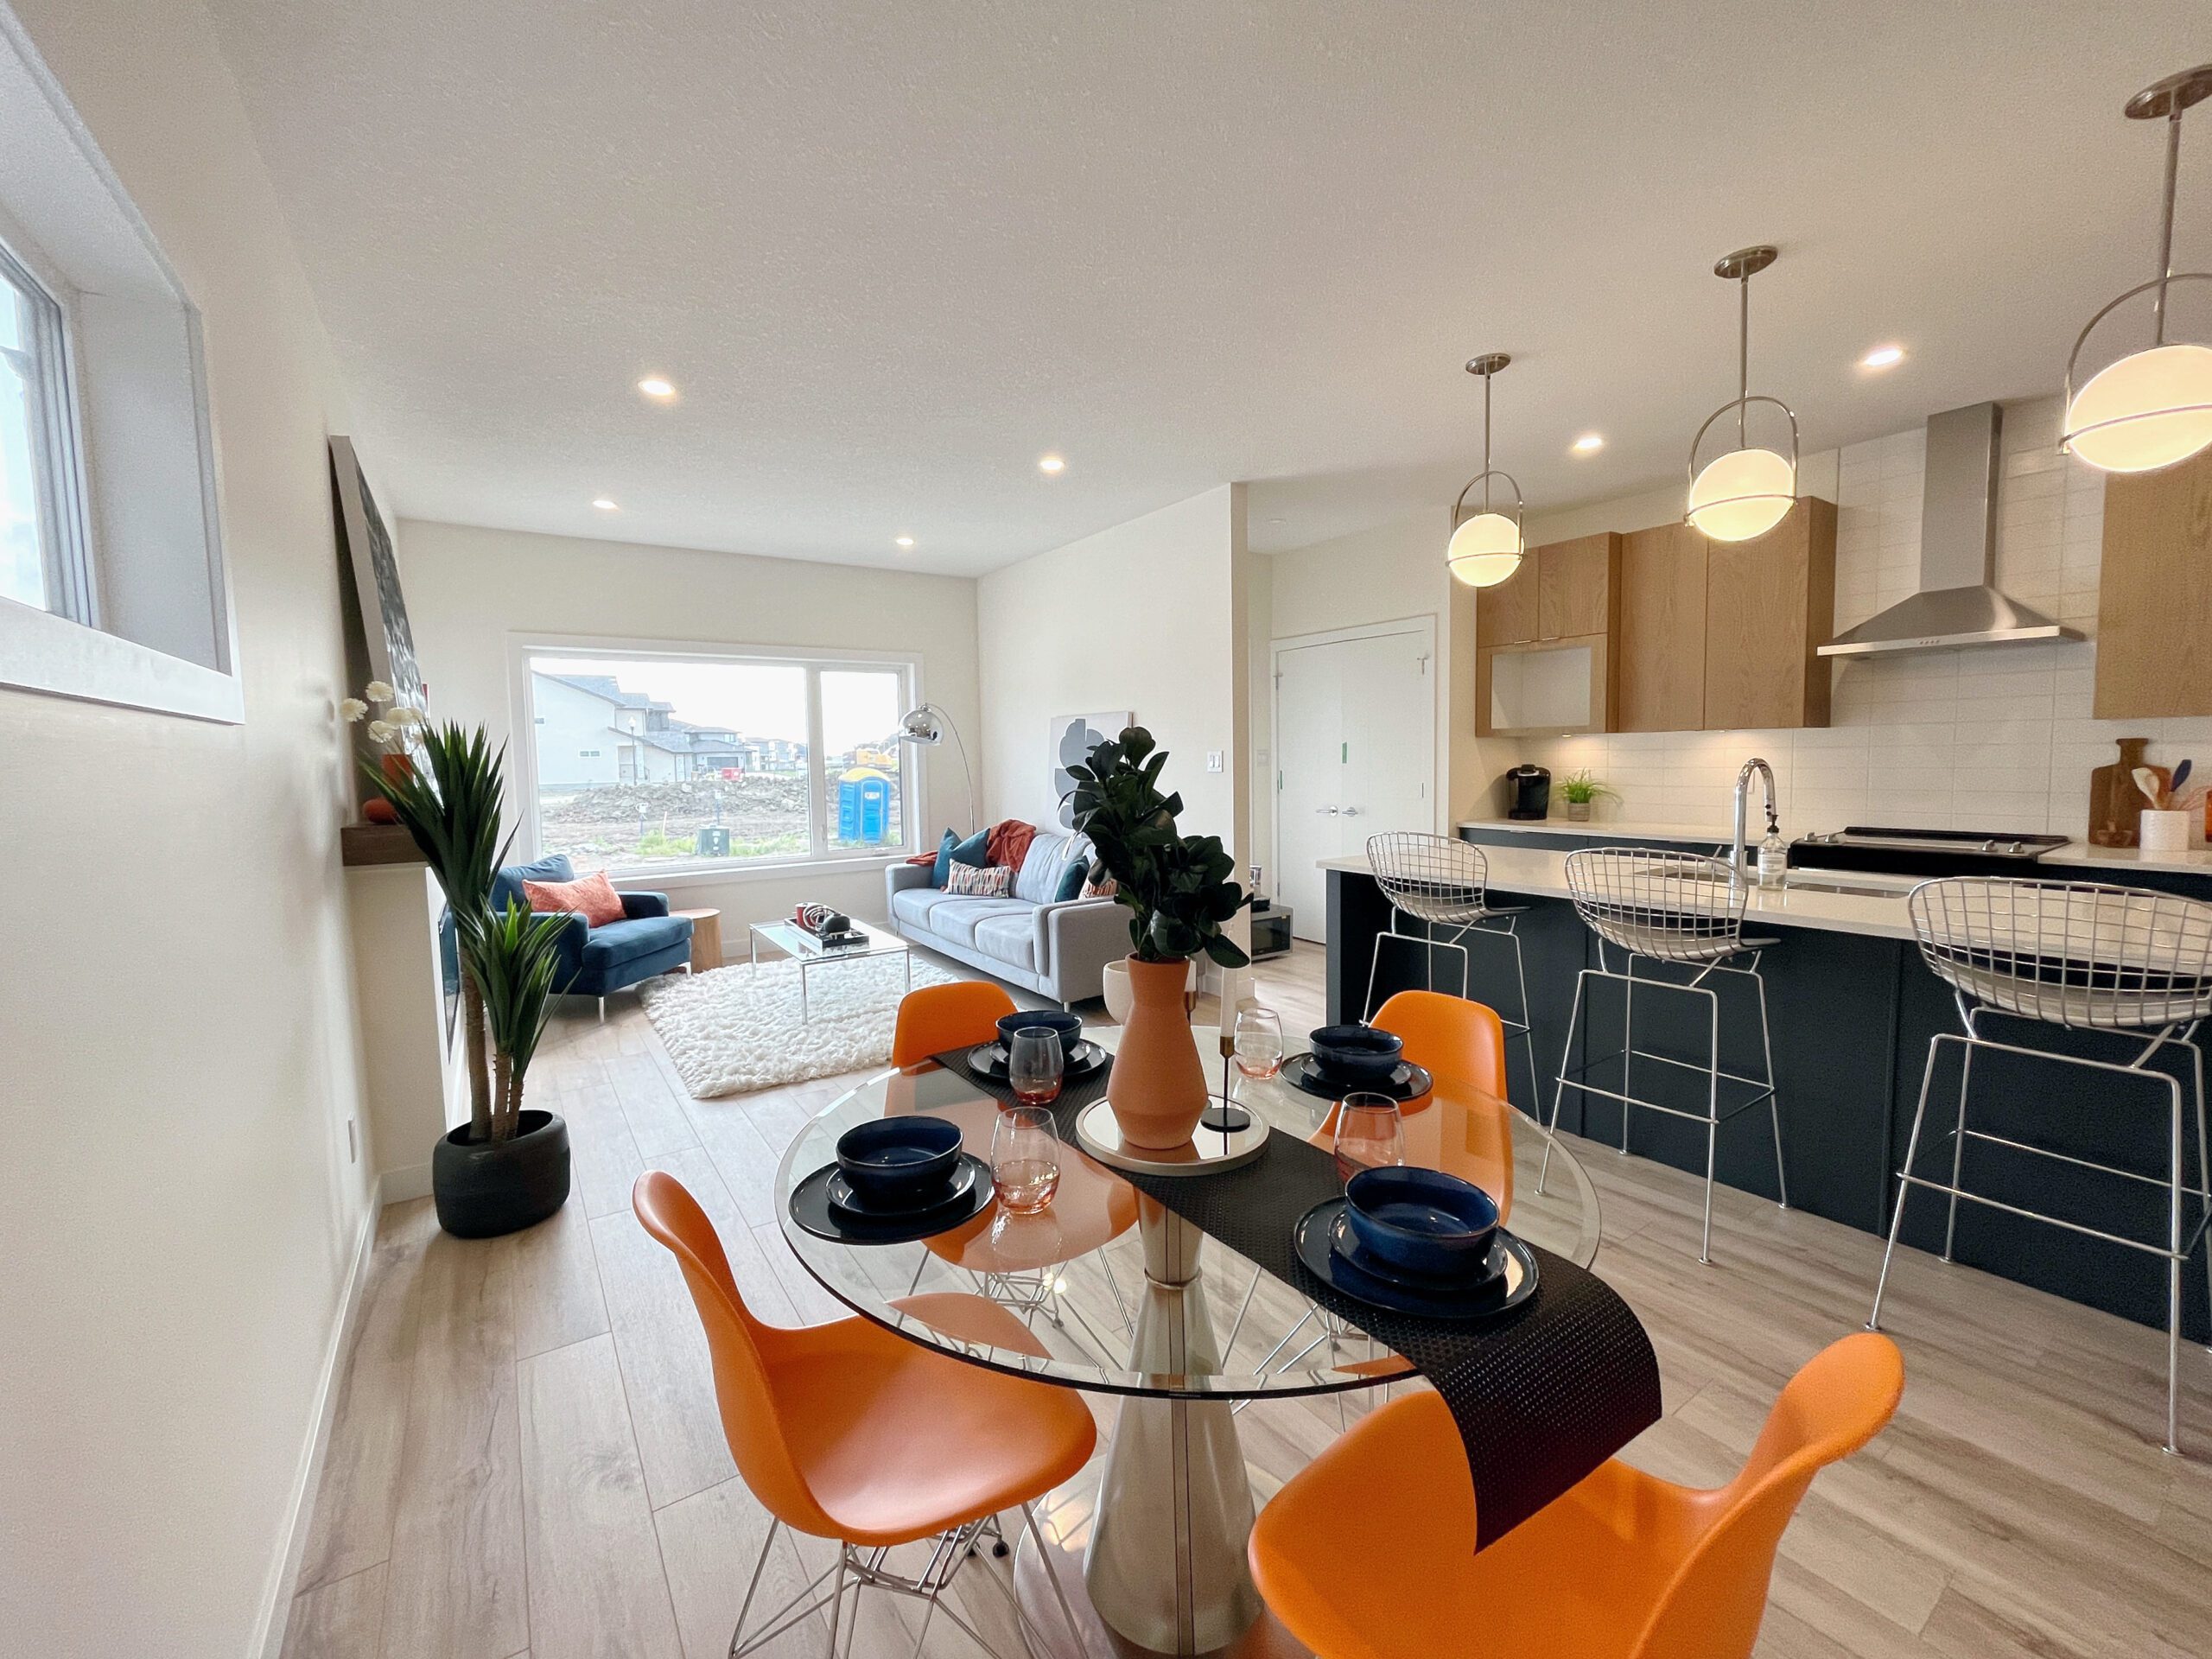 a kitchen with orange chairs and a dining table.